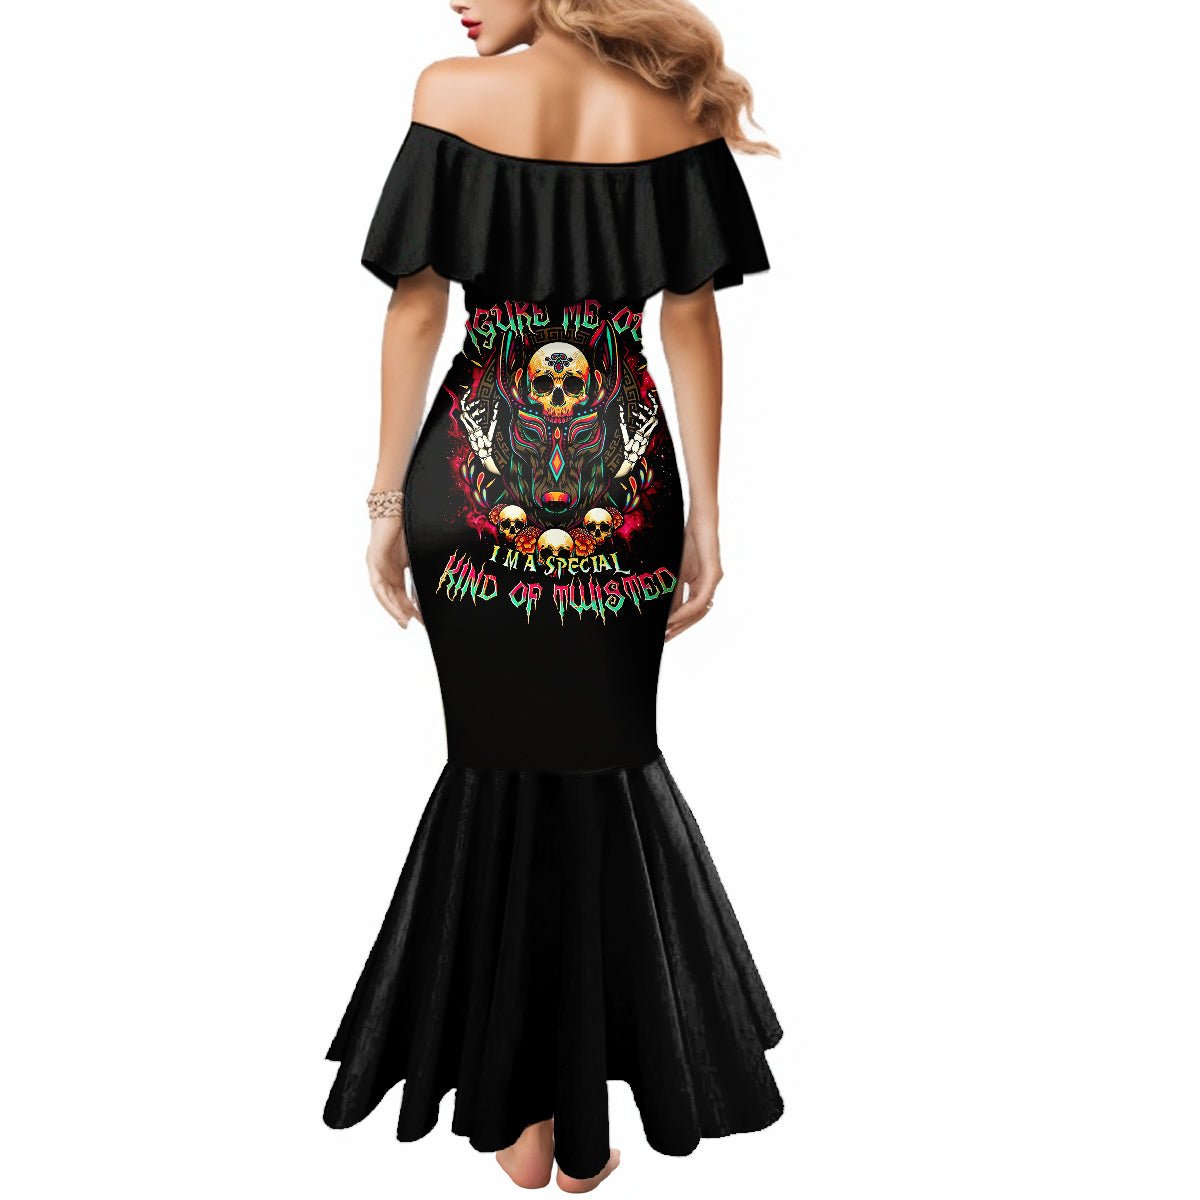 Anubis Skull Mermaid Dress Skull Anubis Don't Try To Figured Me Out DT01 - The Mazicc - Women - S - Black